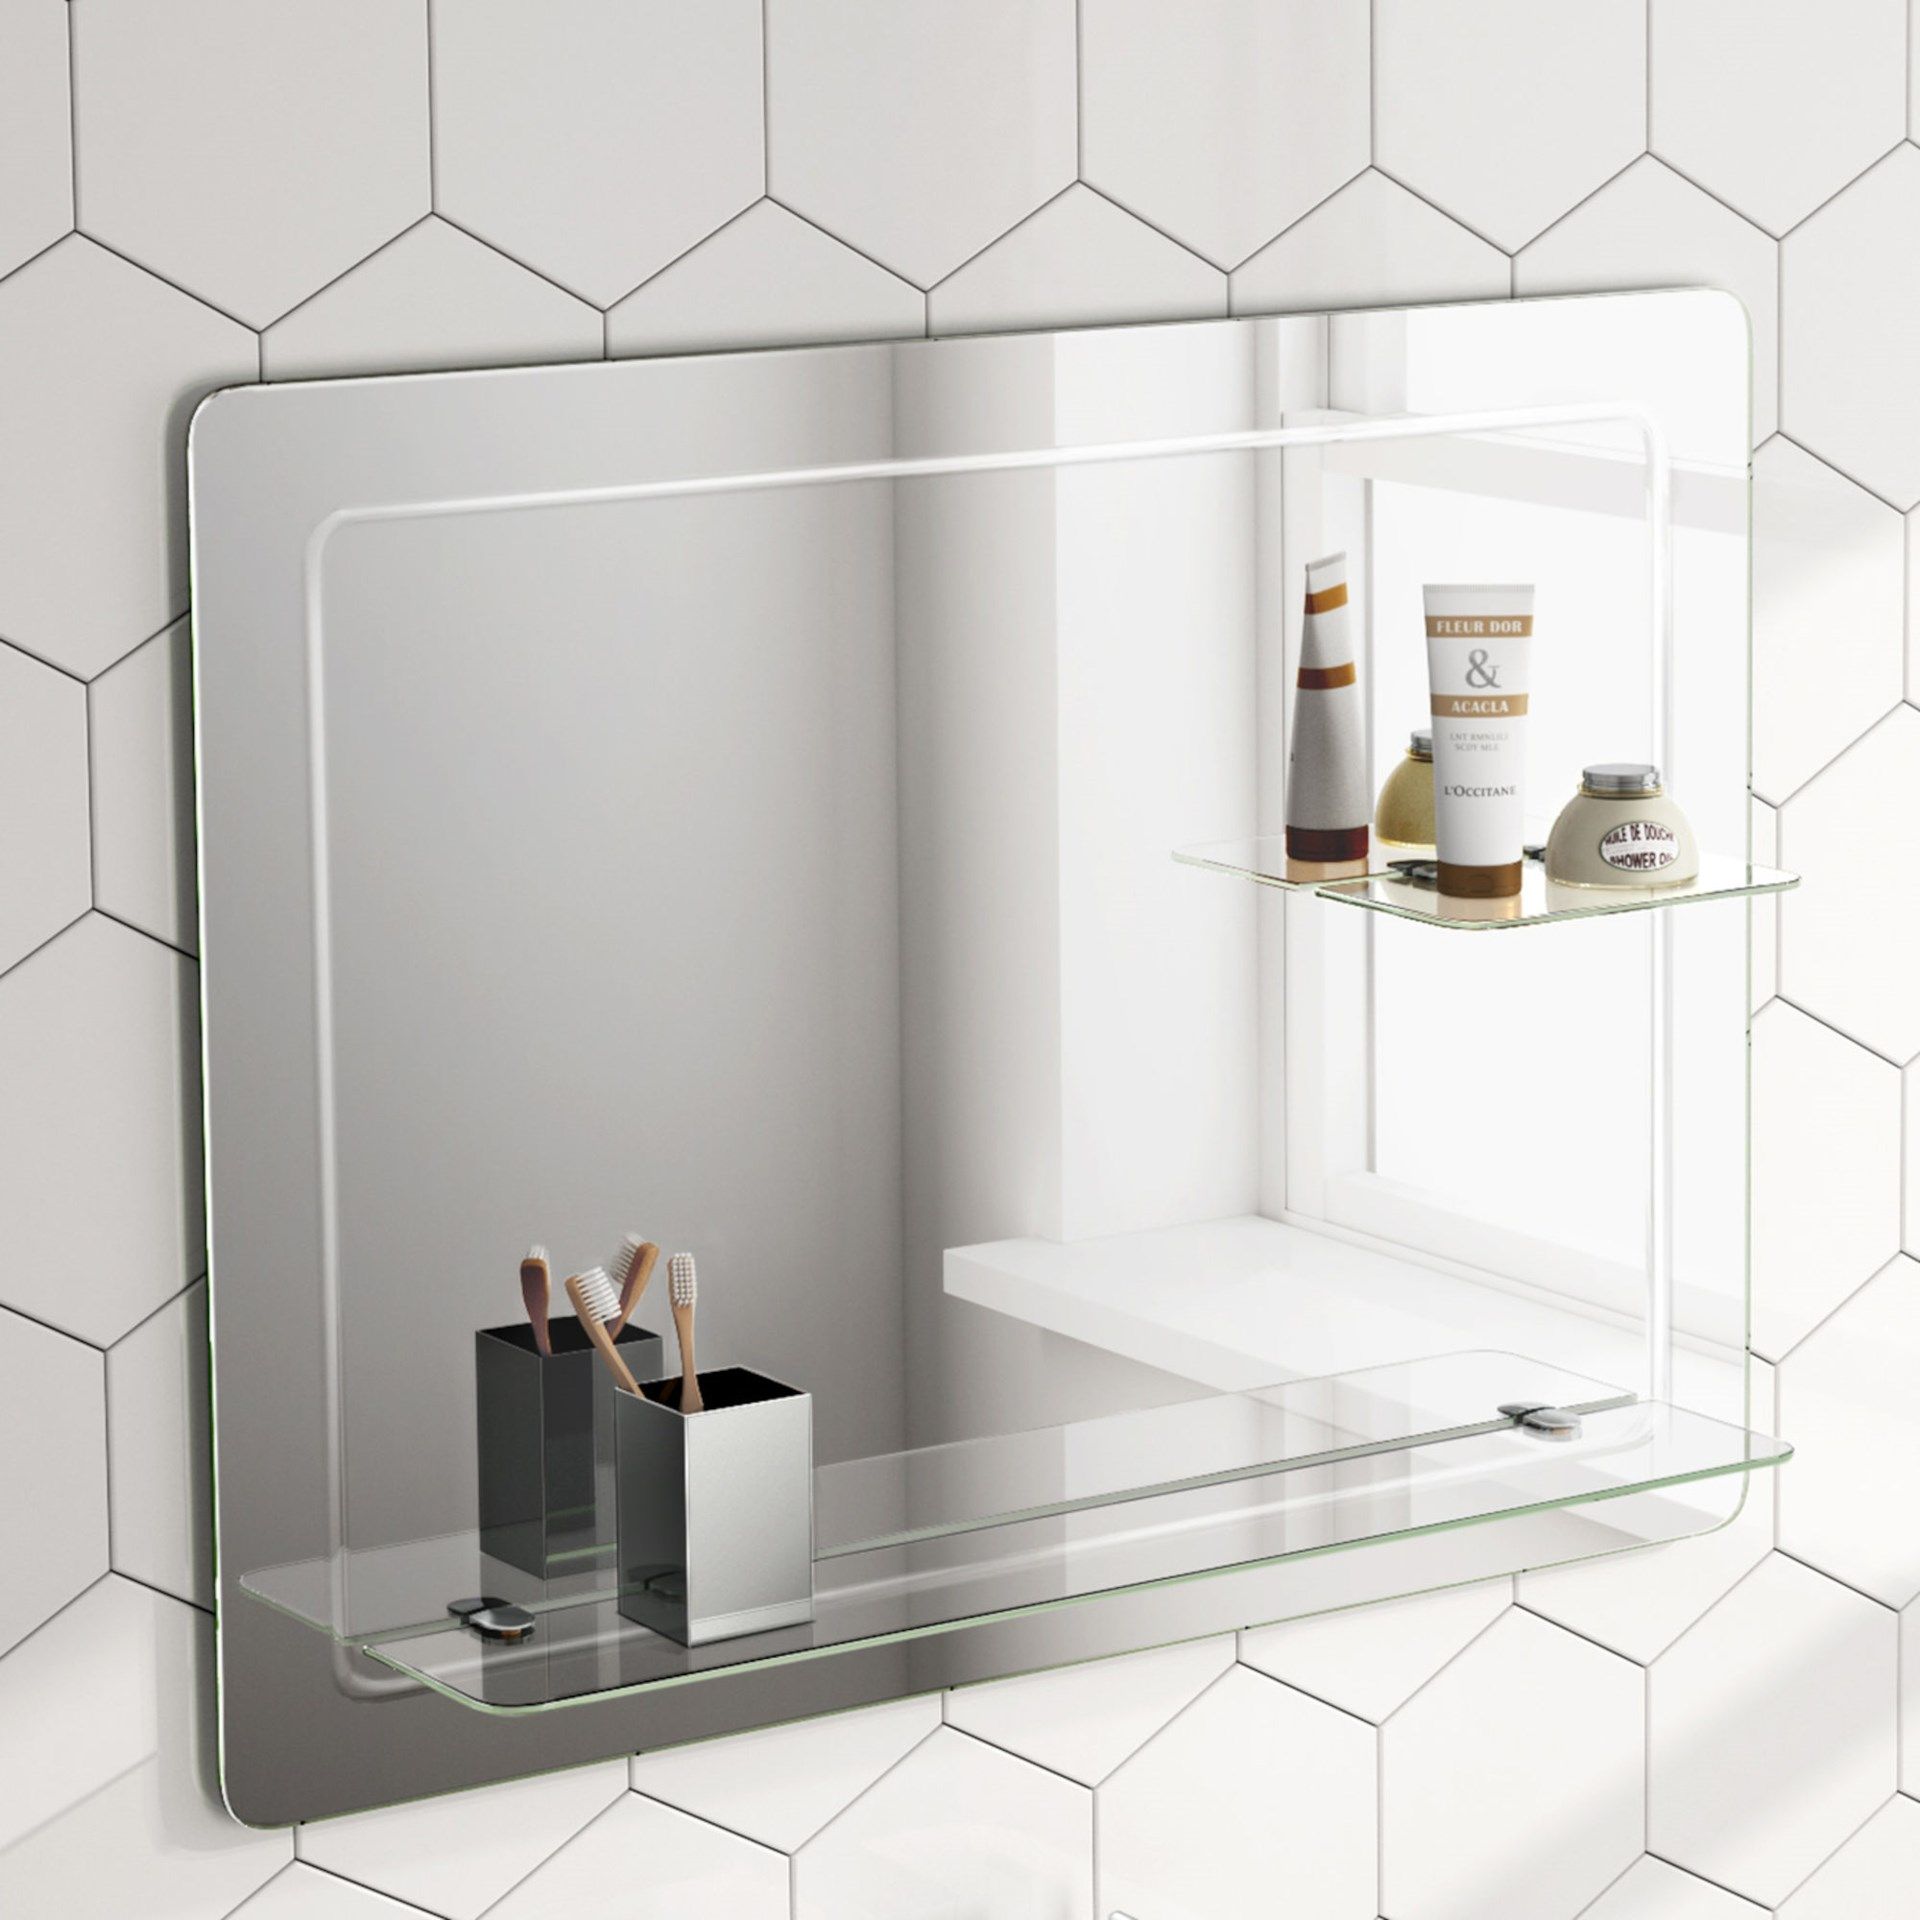 (UK60) 800x600mm Loxely Mirror & Shelf. Smooth beveled edge for additional safety and style Two